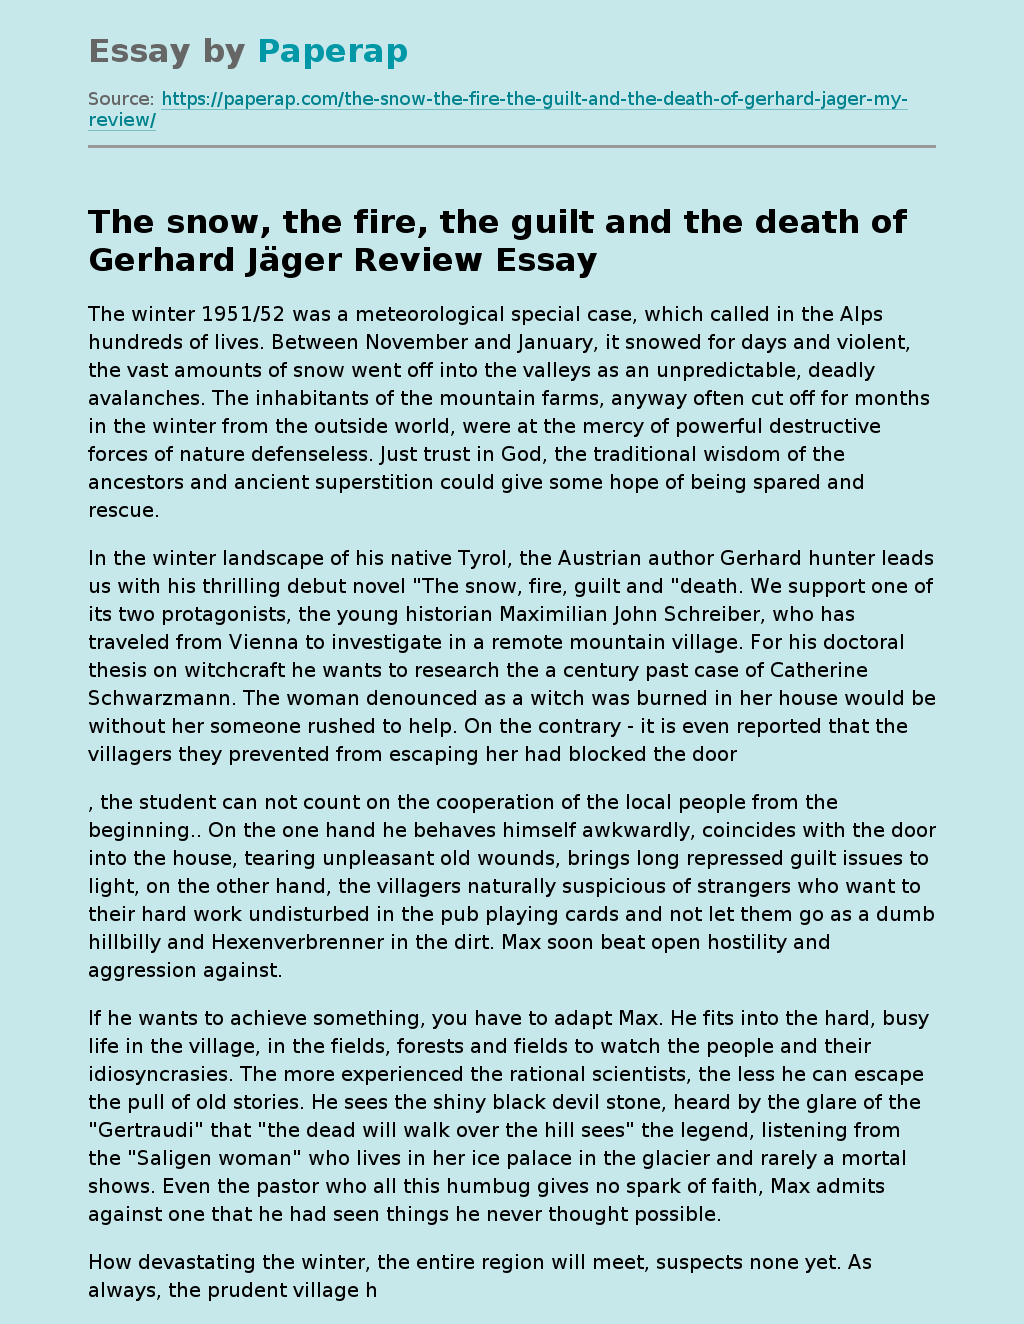 "The Snow, the Fire, the Guilt and the Death" of Gerhard Jäger